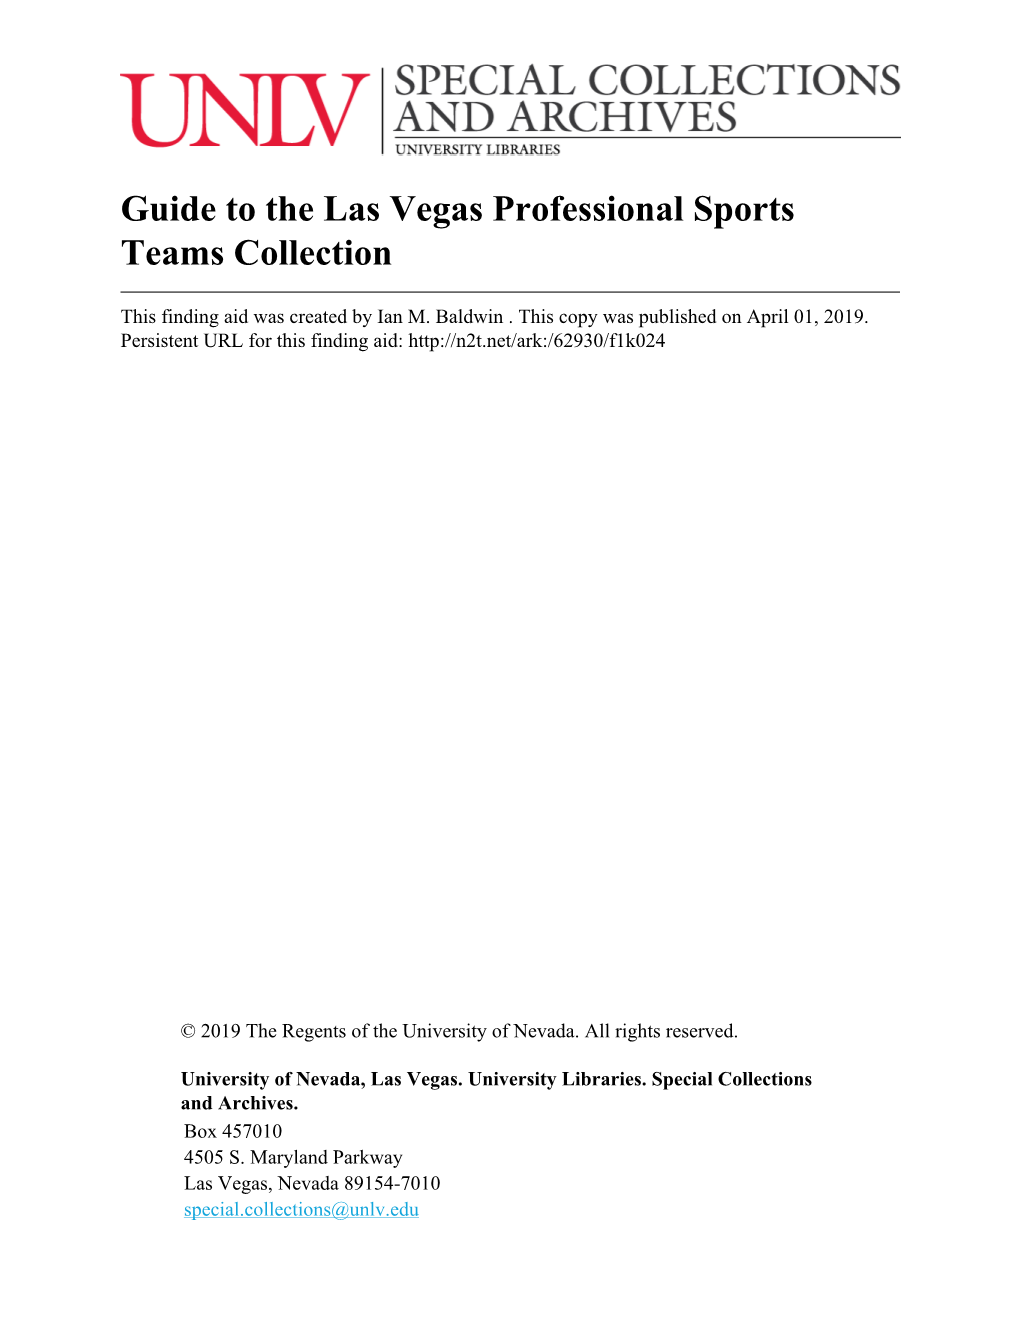 Guide to the Las Vegas Professional Sports Teams Collection